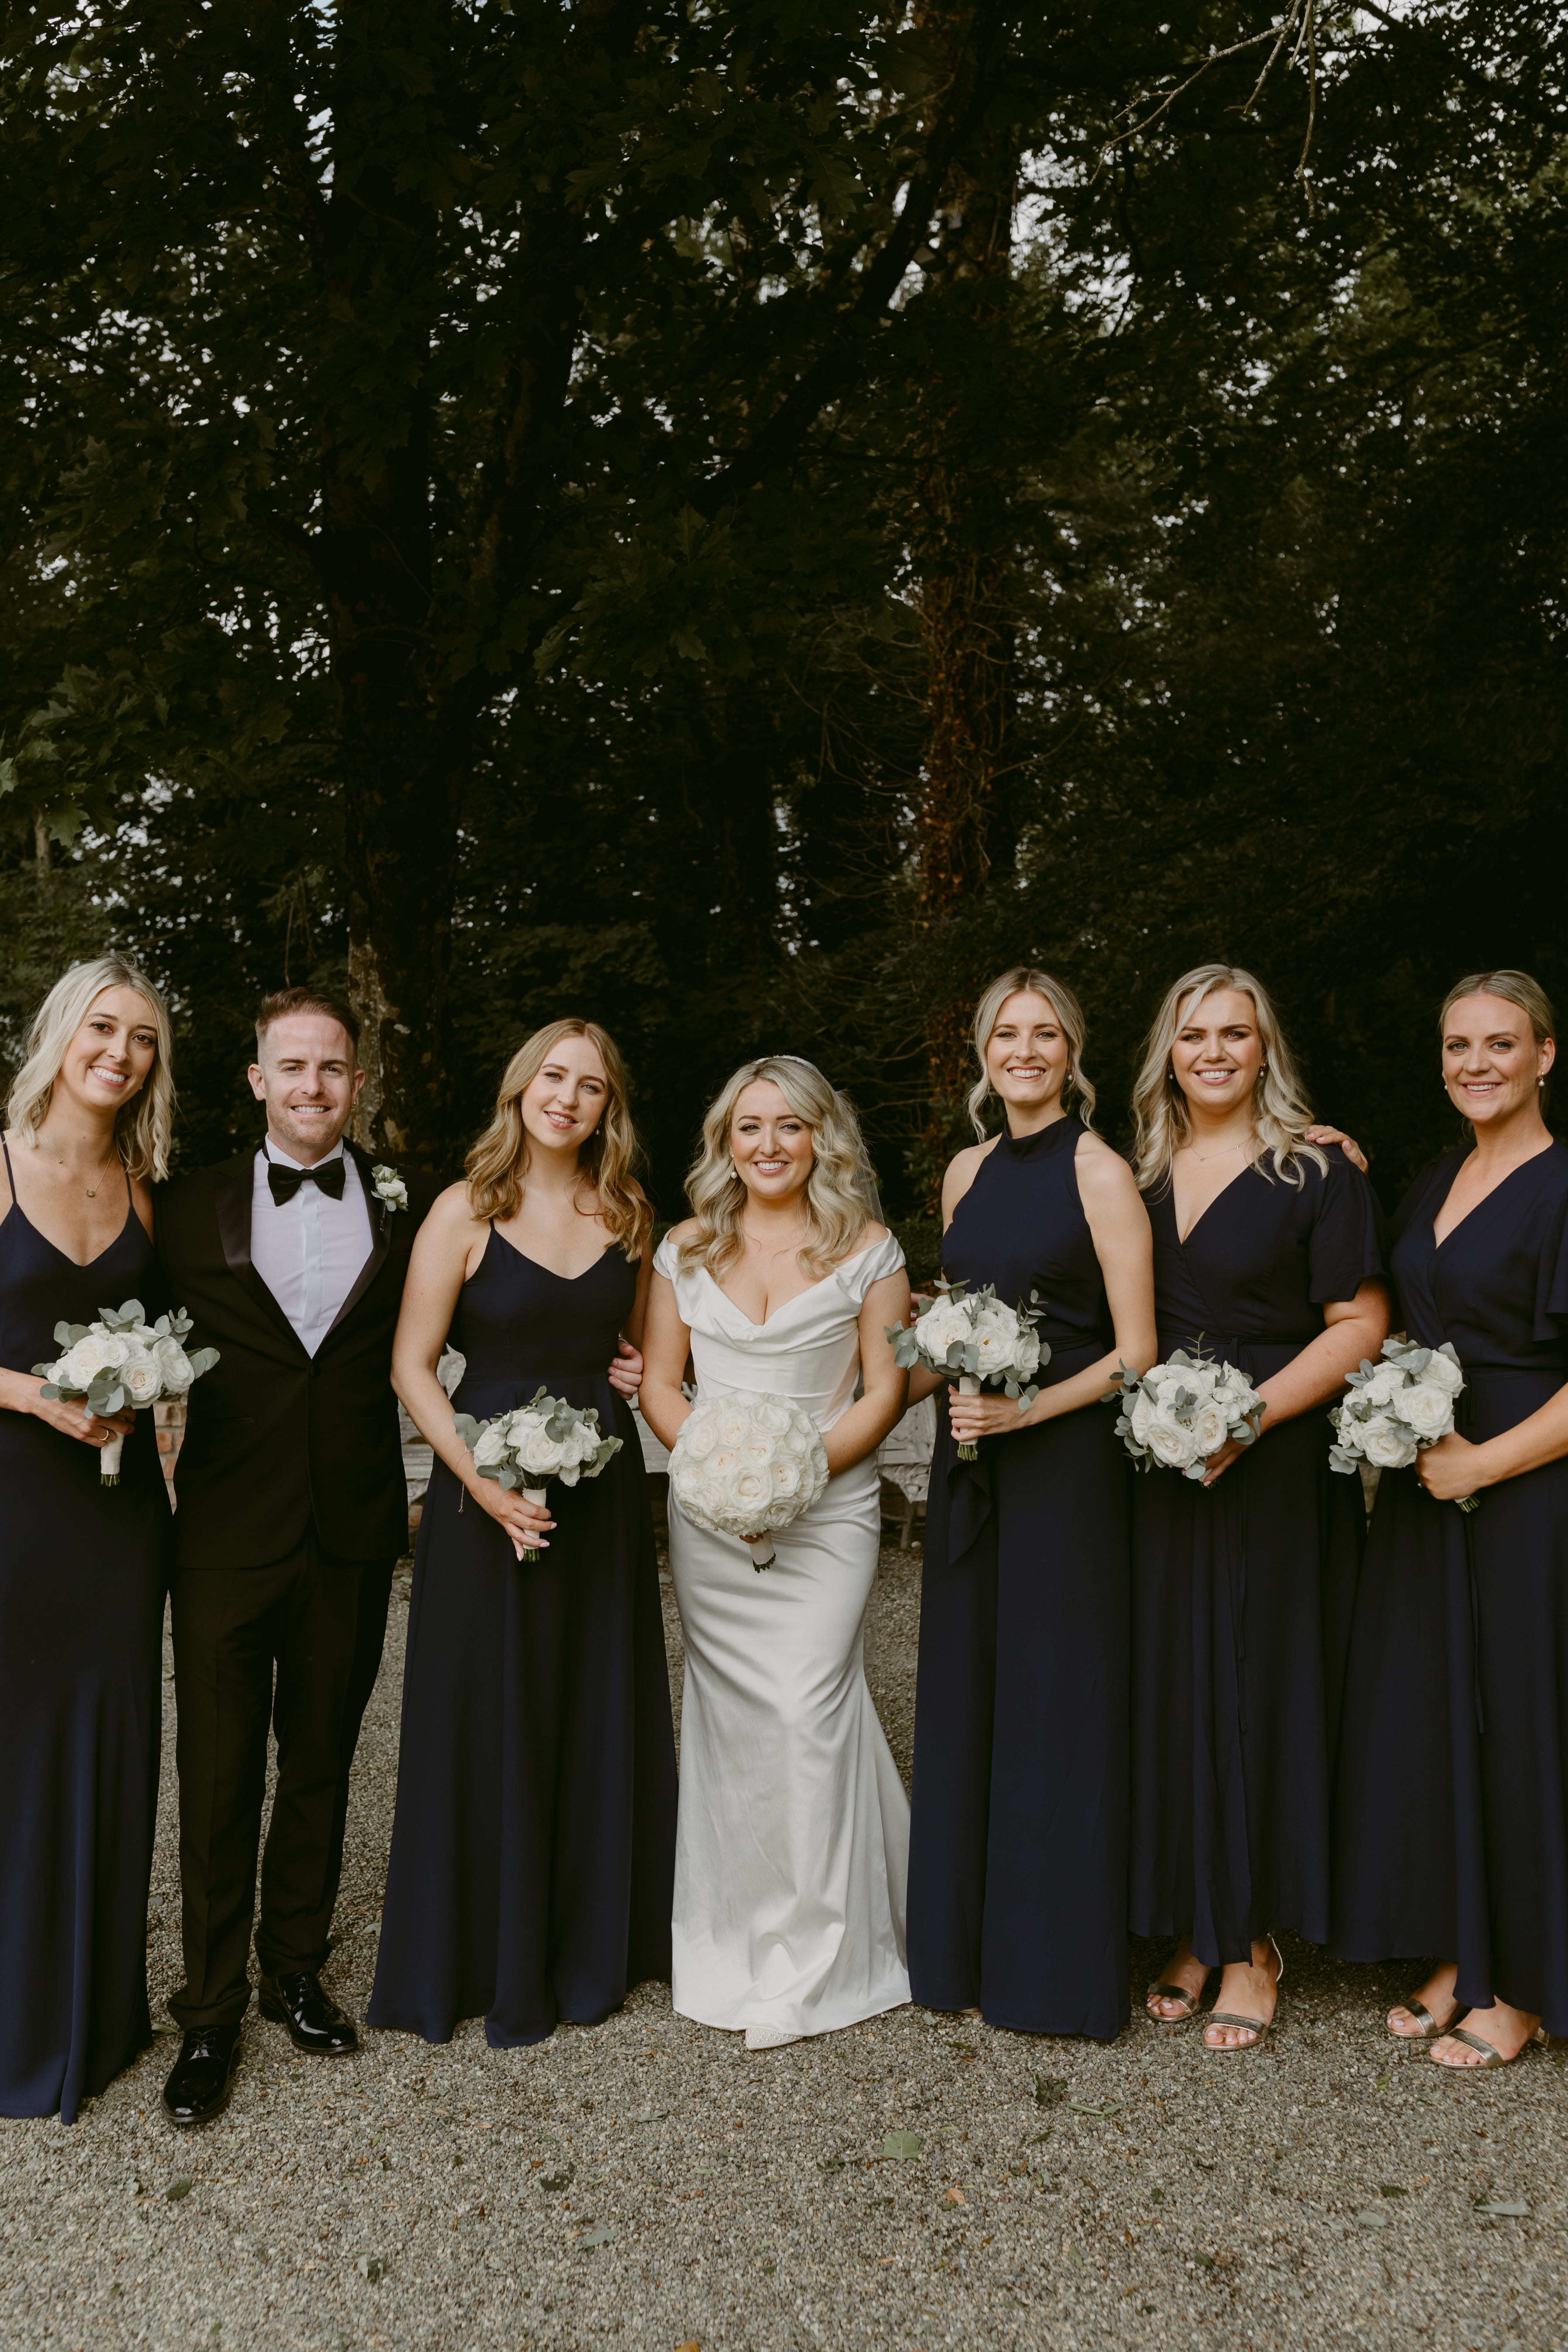 Bride and groom with bridesmaids in ink navy blue bridesmaids dresses mix & match